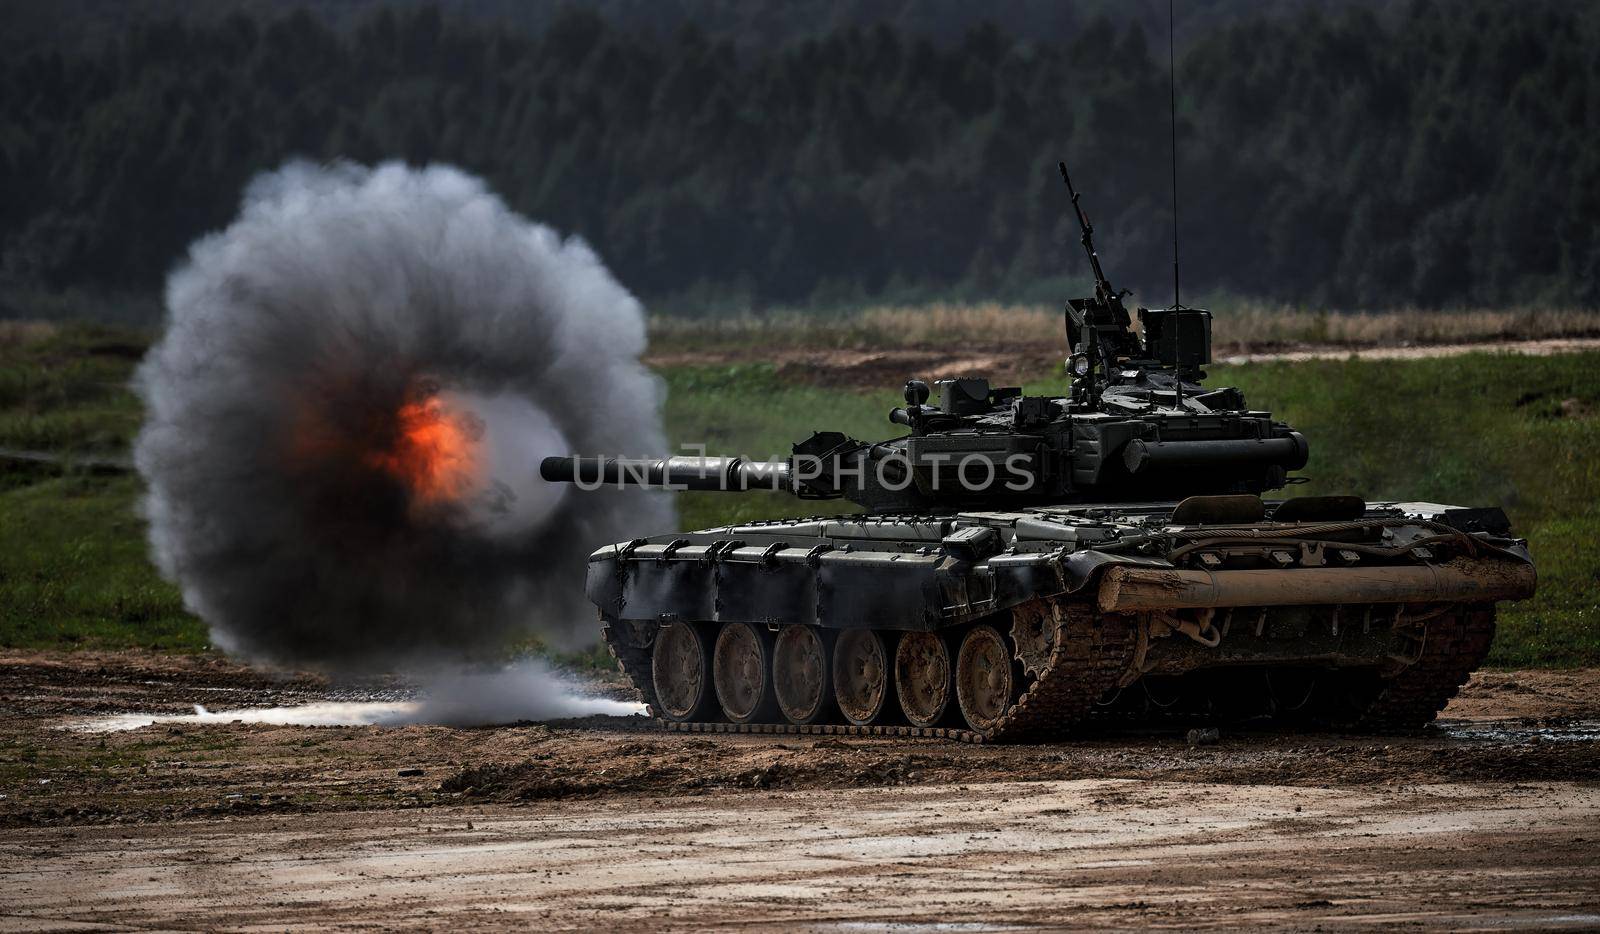 Shot from a tank gun with a smoke ring, the frame of military operations. Russian Modern tank Shooting at a target. Smoke, explosion, military Exercises, Military operations by EvgeniyQW